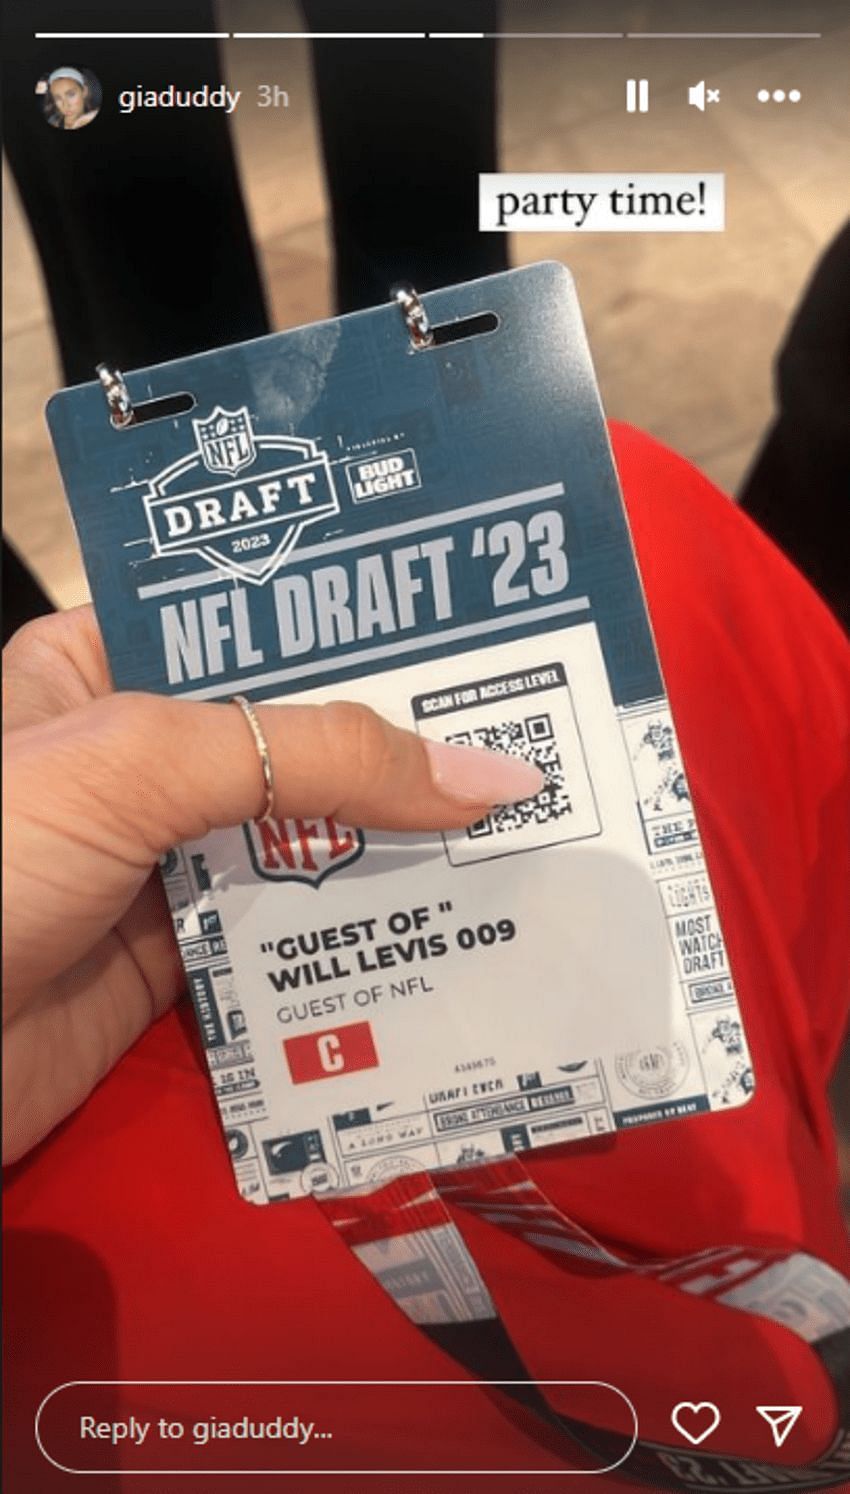 In Photos Will Levis And Girlfriend Gia Duddy Take Over Nfl Draft With Stunning Suit And Red Dress